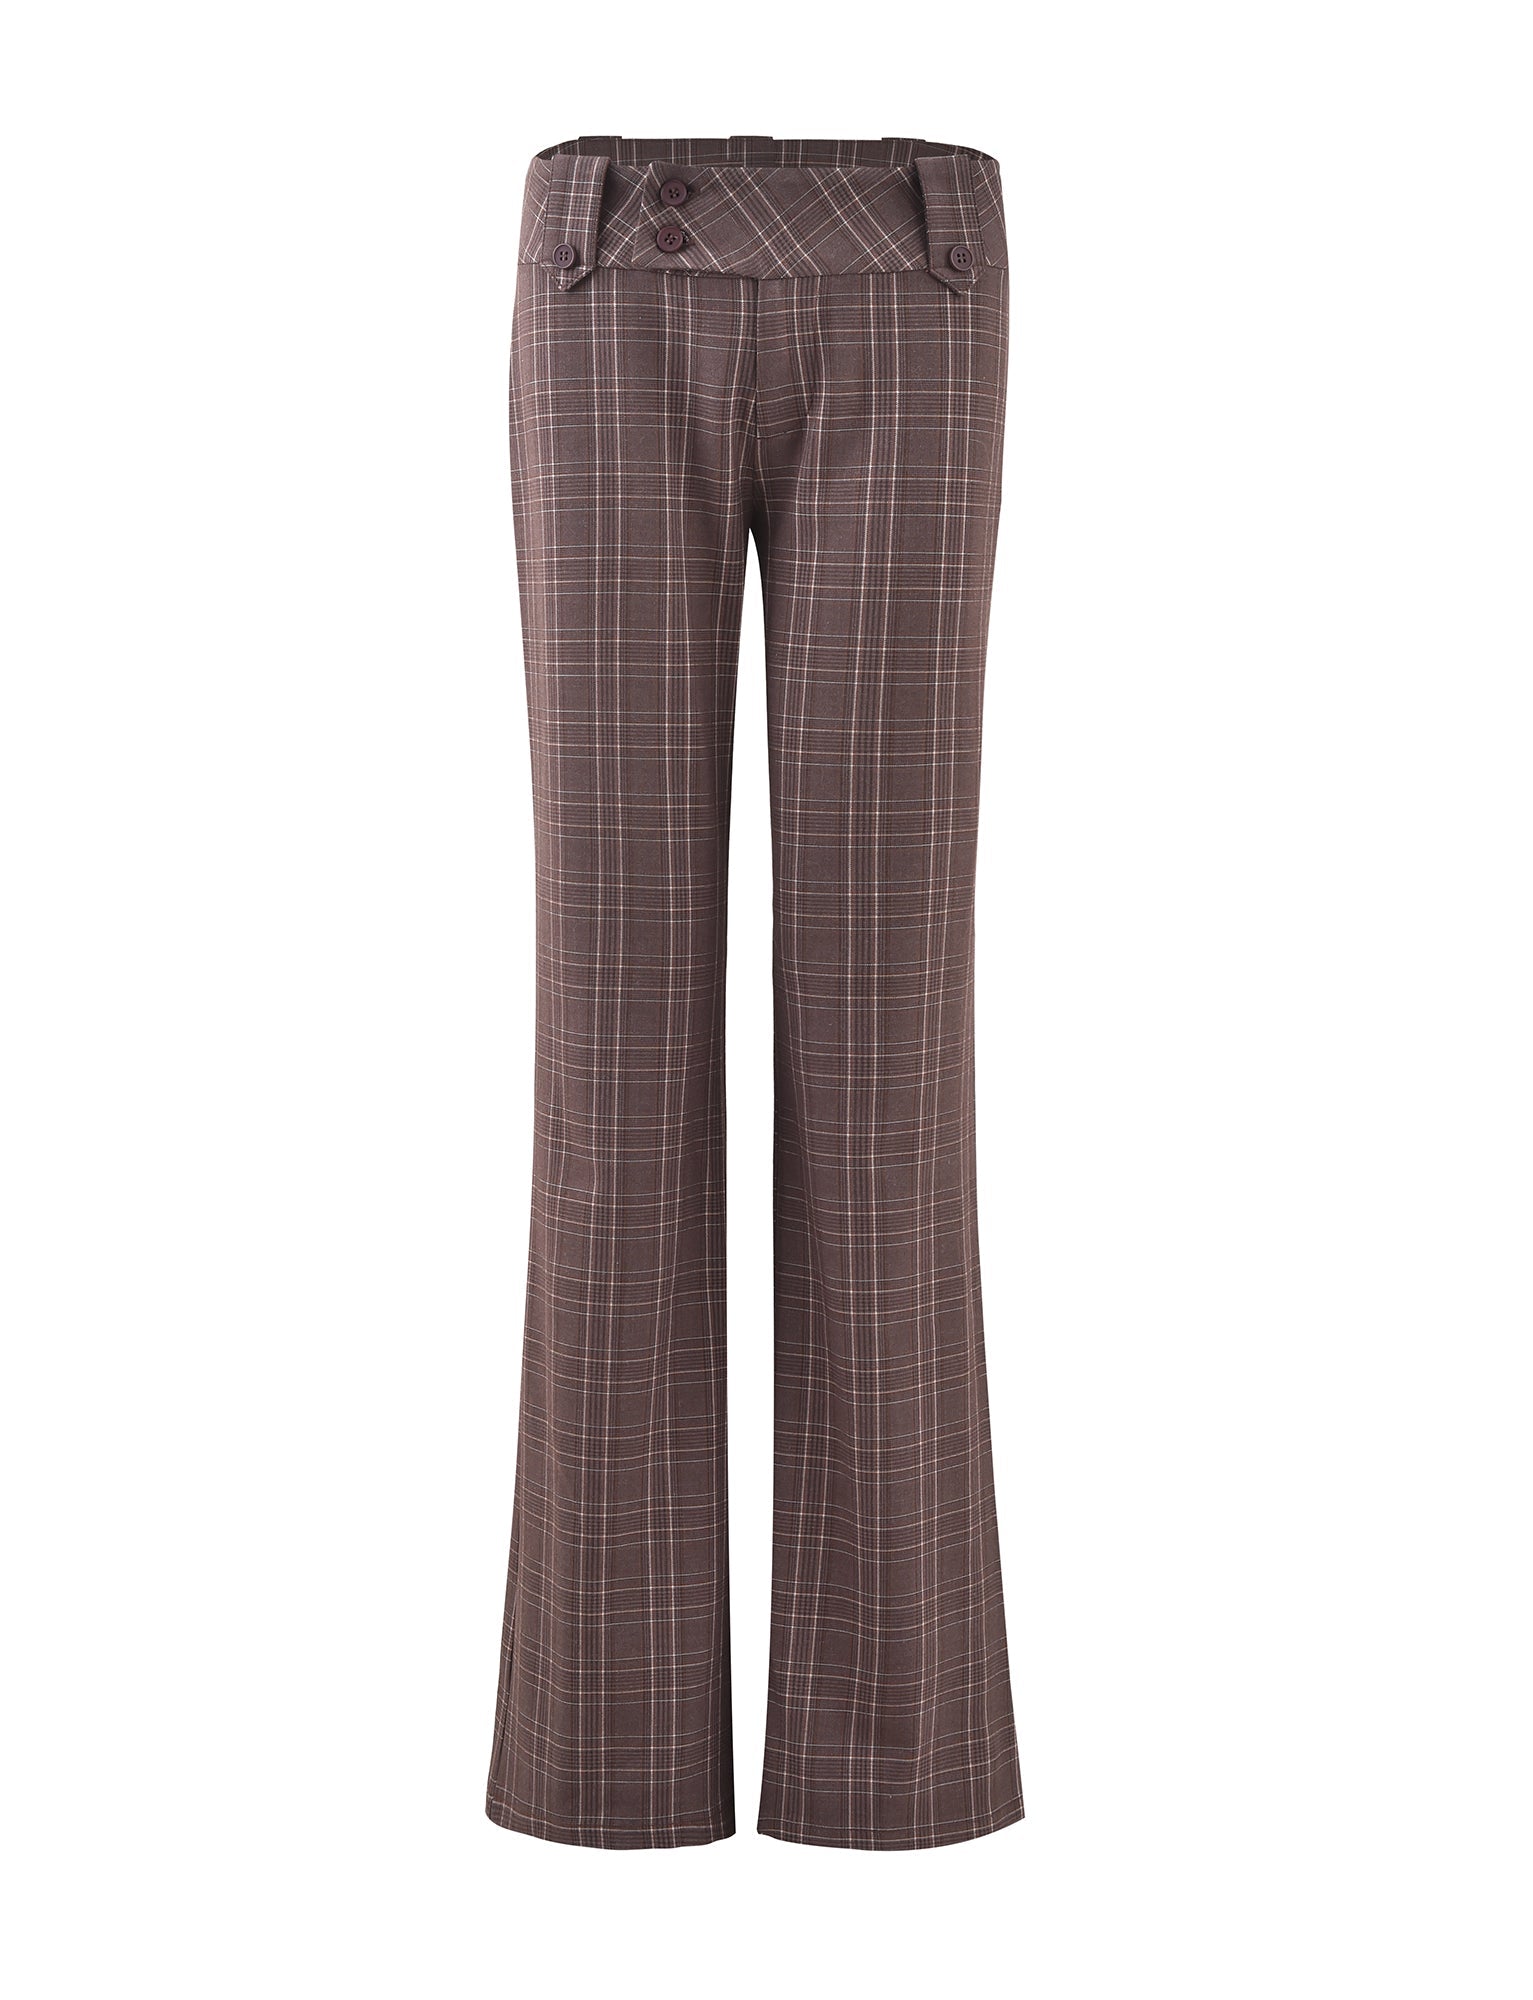 KITTIE PANT - BROWN : CHOCOLATE CHECK – Tiger Mist Rest of World